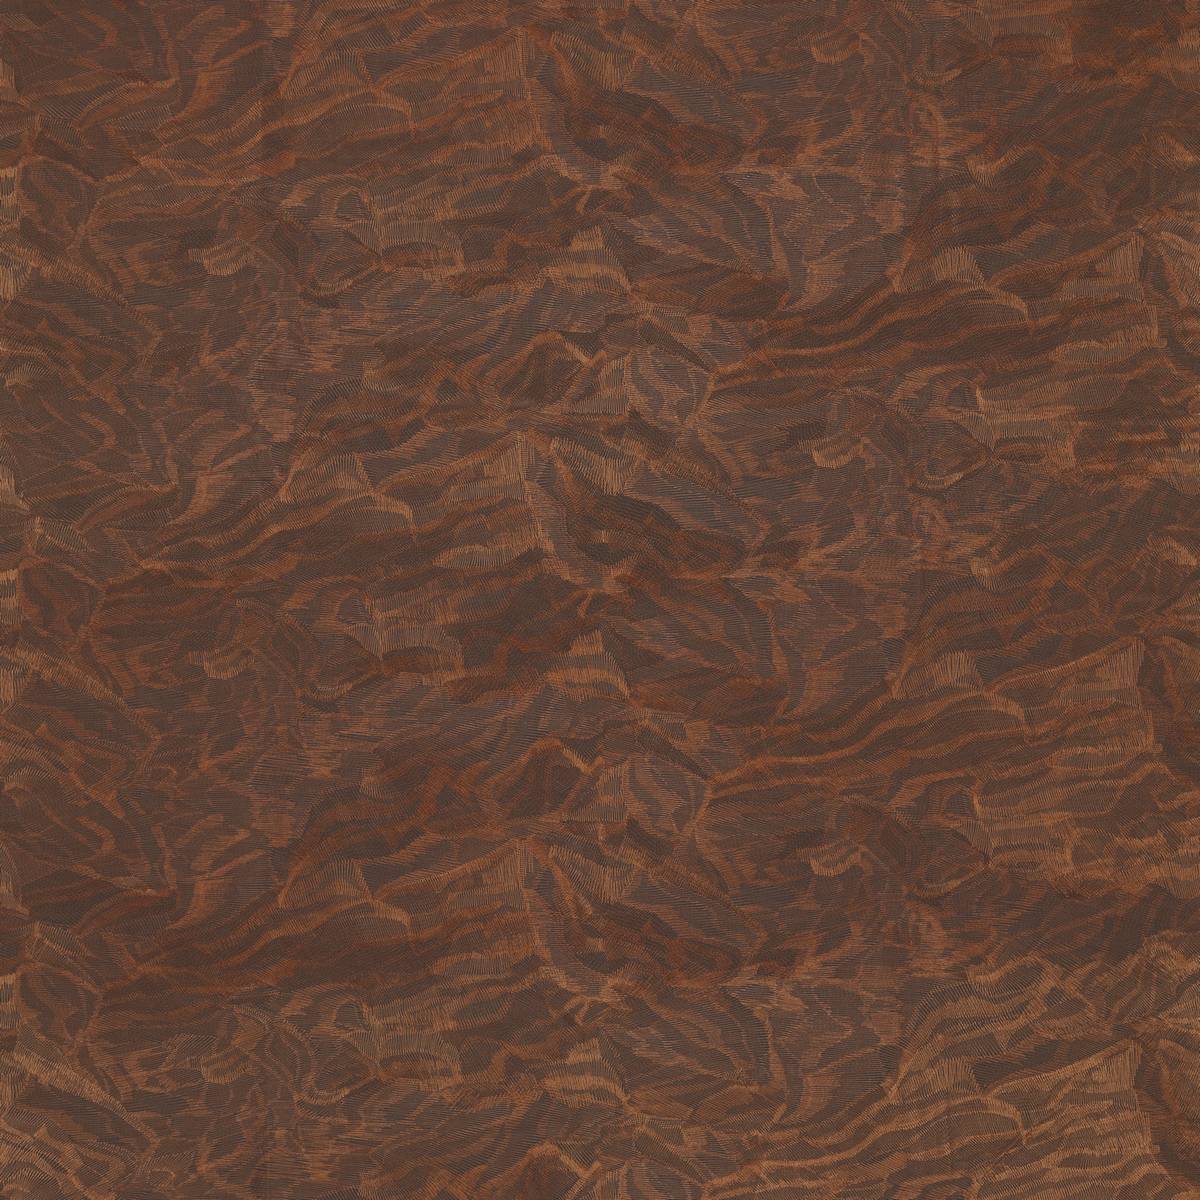 Cirrus Embroidery Copper Fabric by Zoffany